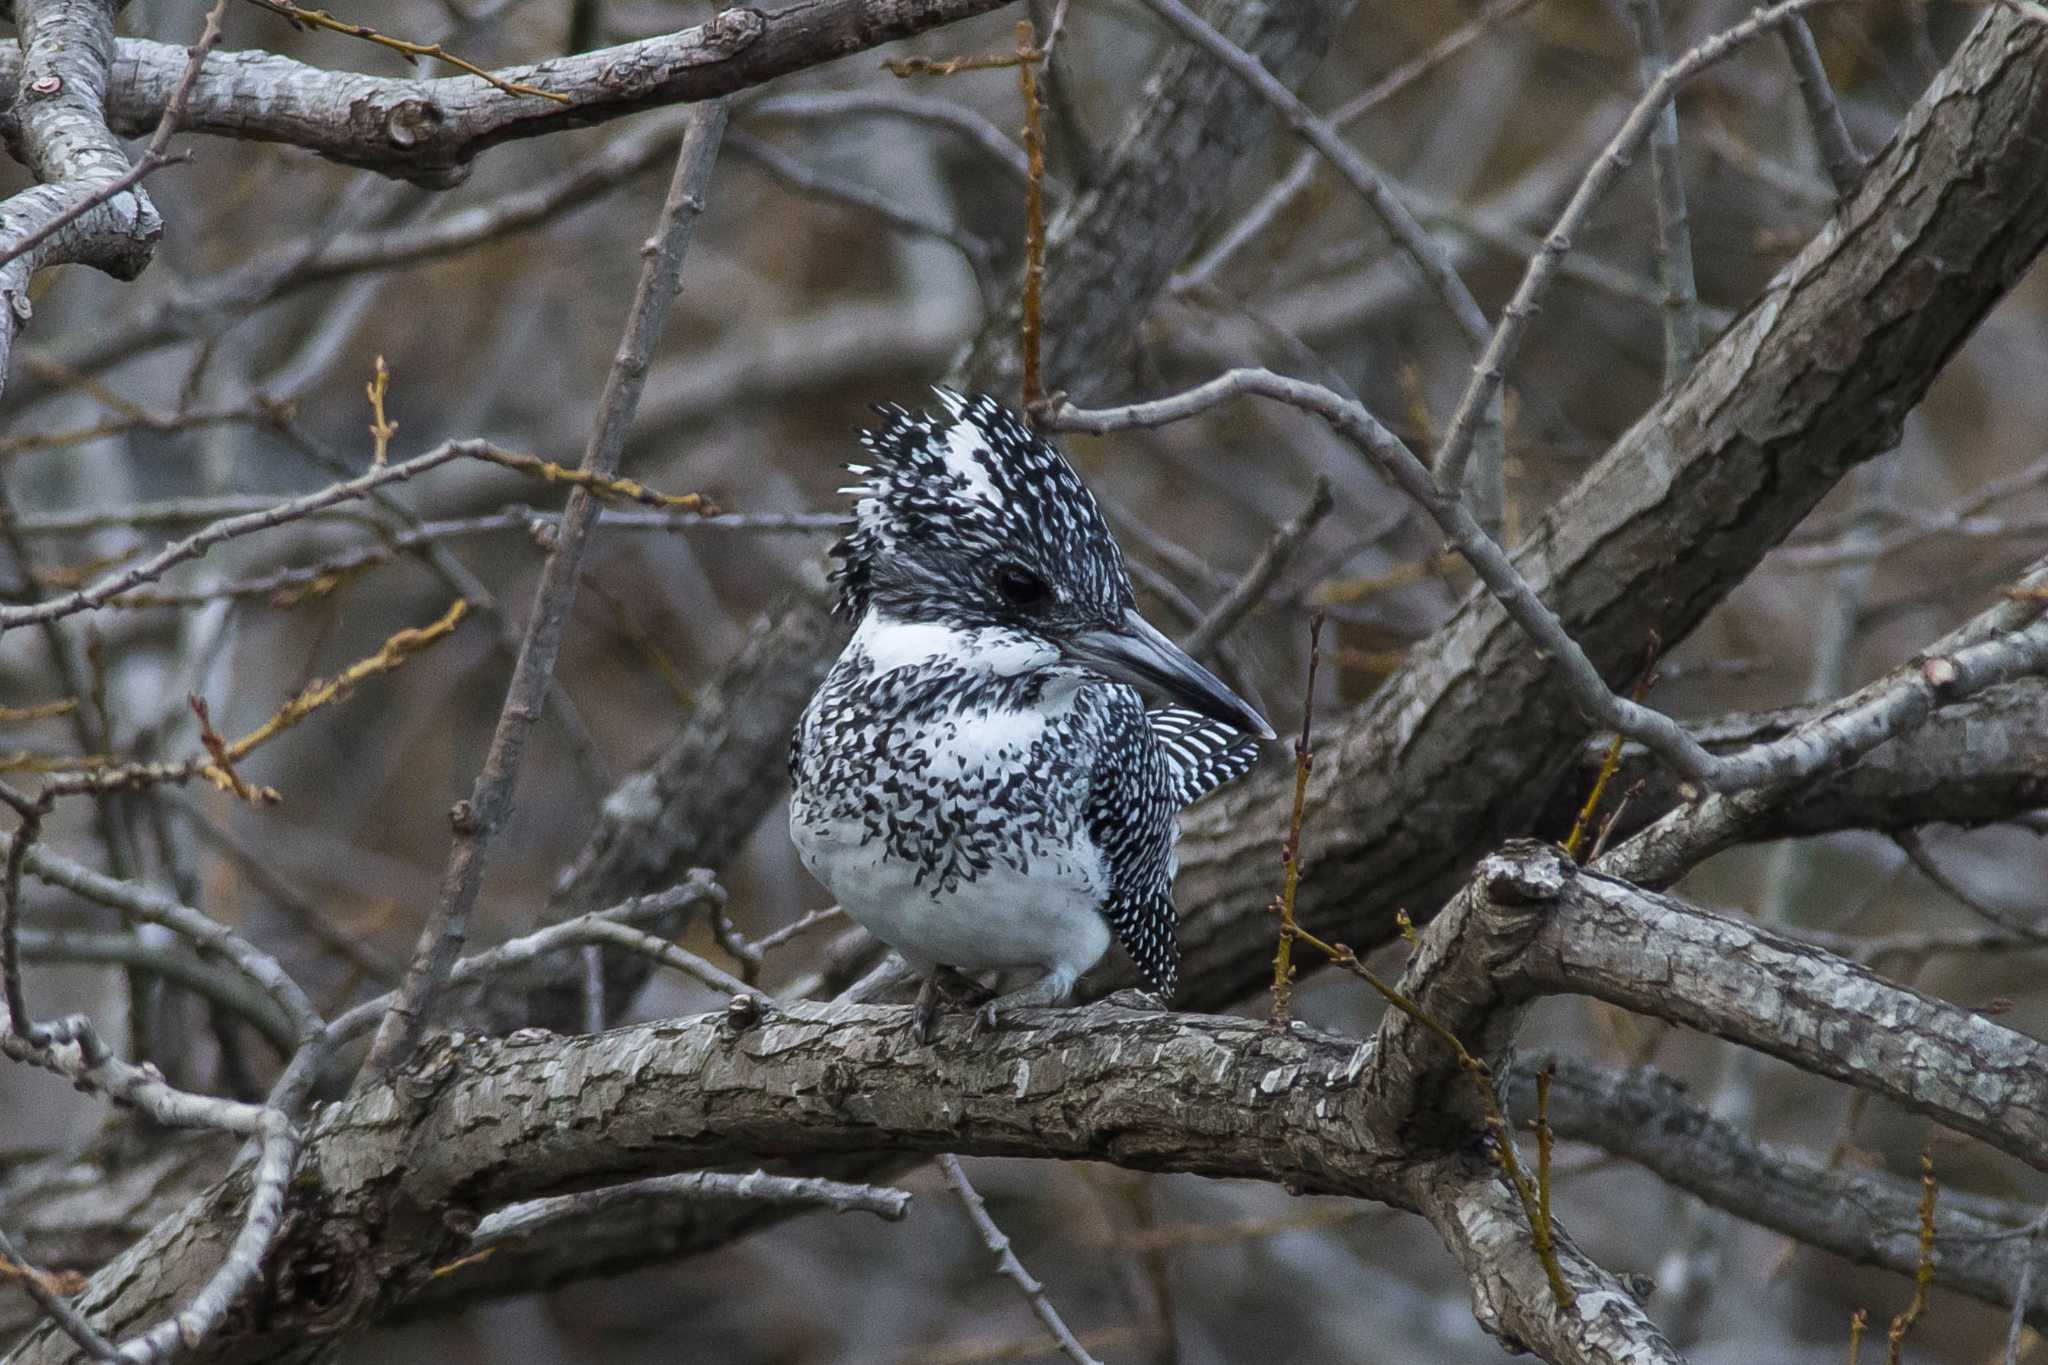 Photo of Crested Kingfisher at 兵庫県 by Tanago Gaia (ichimonji)